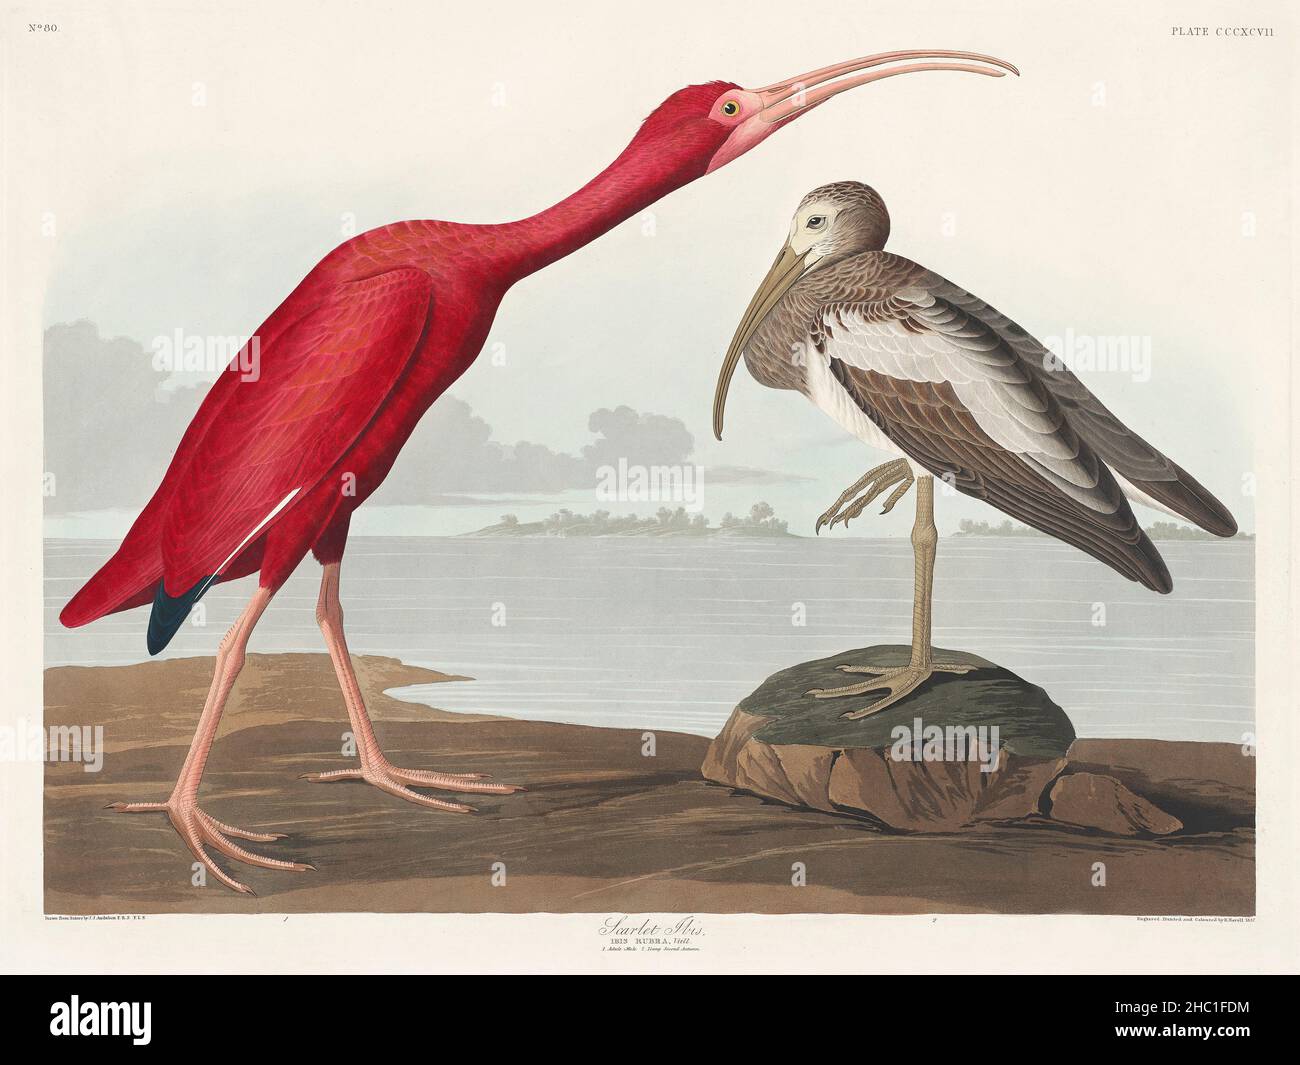 Scarlet Ibis from Birds of America (1827) by John James Audubon (1785 - 1851 ), etched by Robert Havell (1793 - 1878). Stock Photo